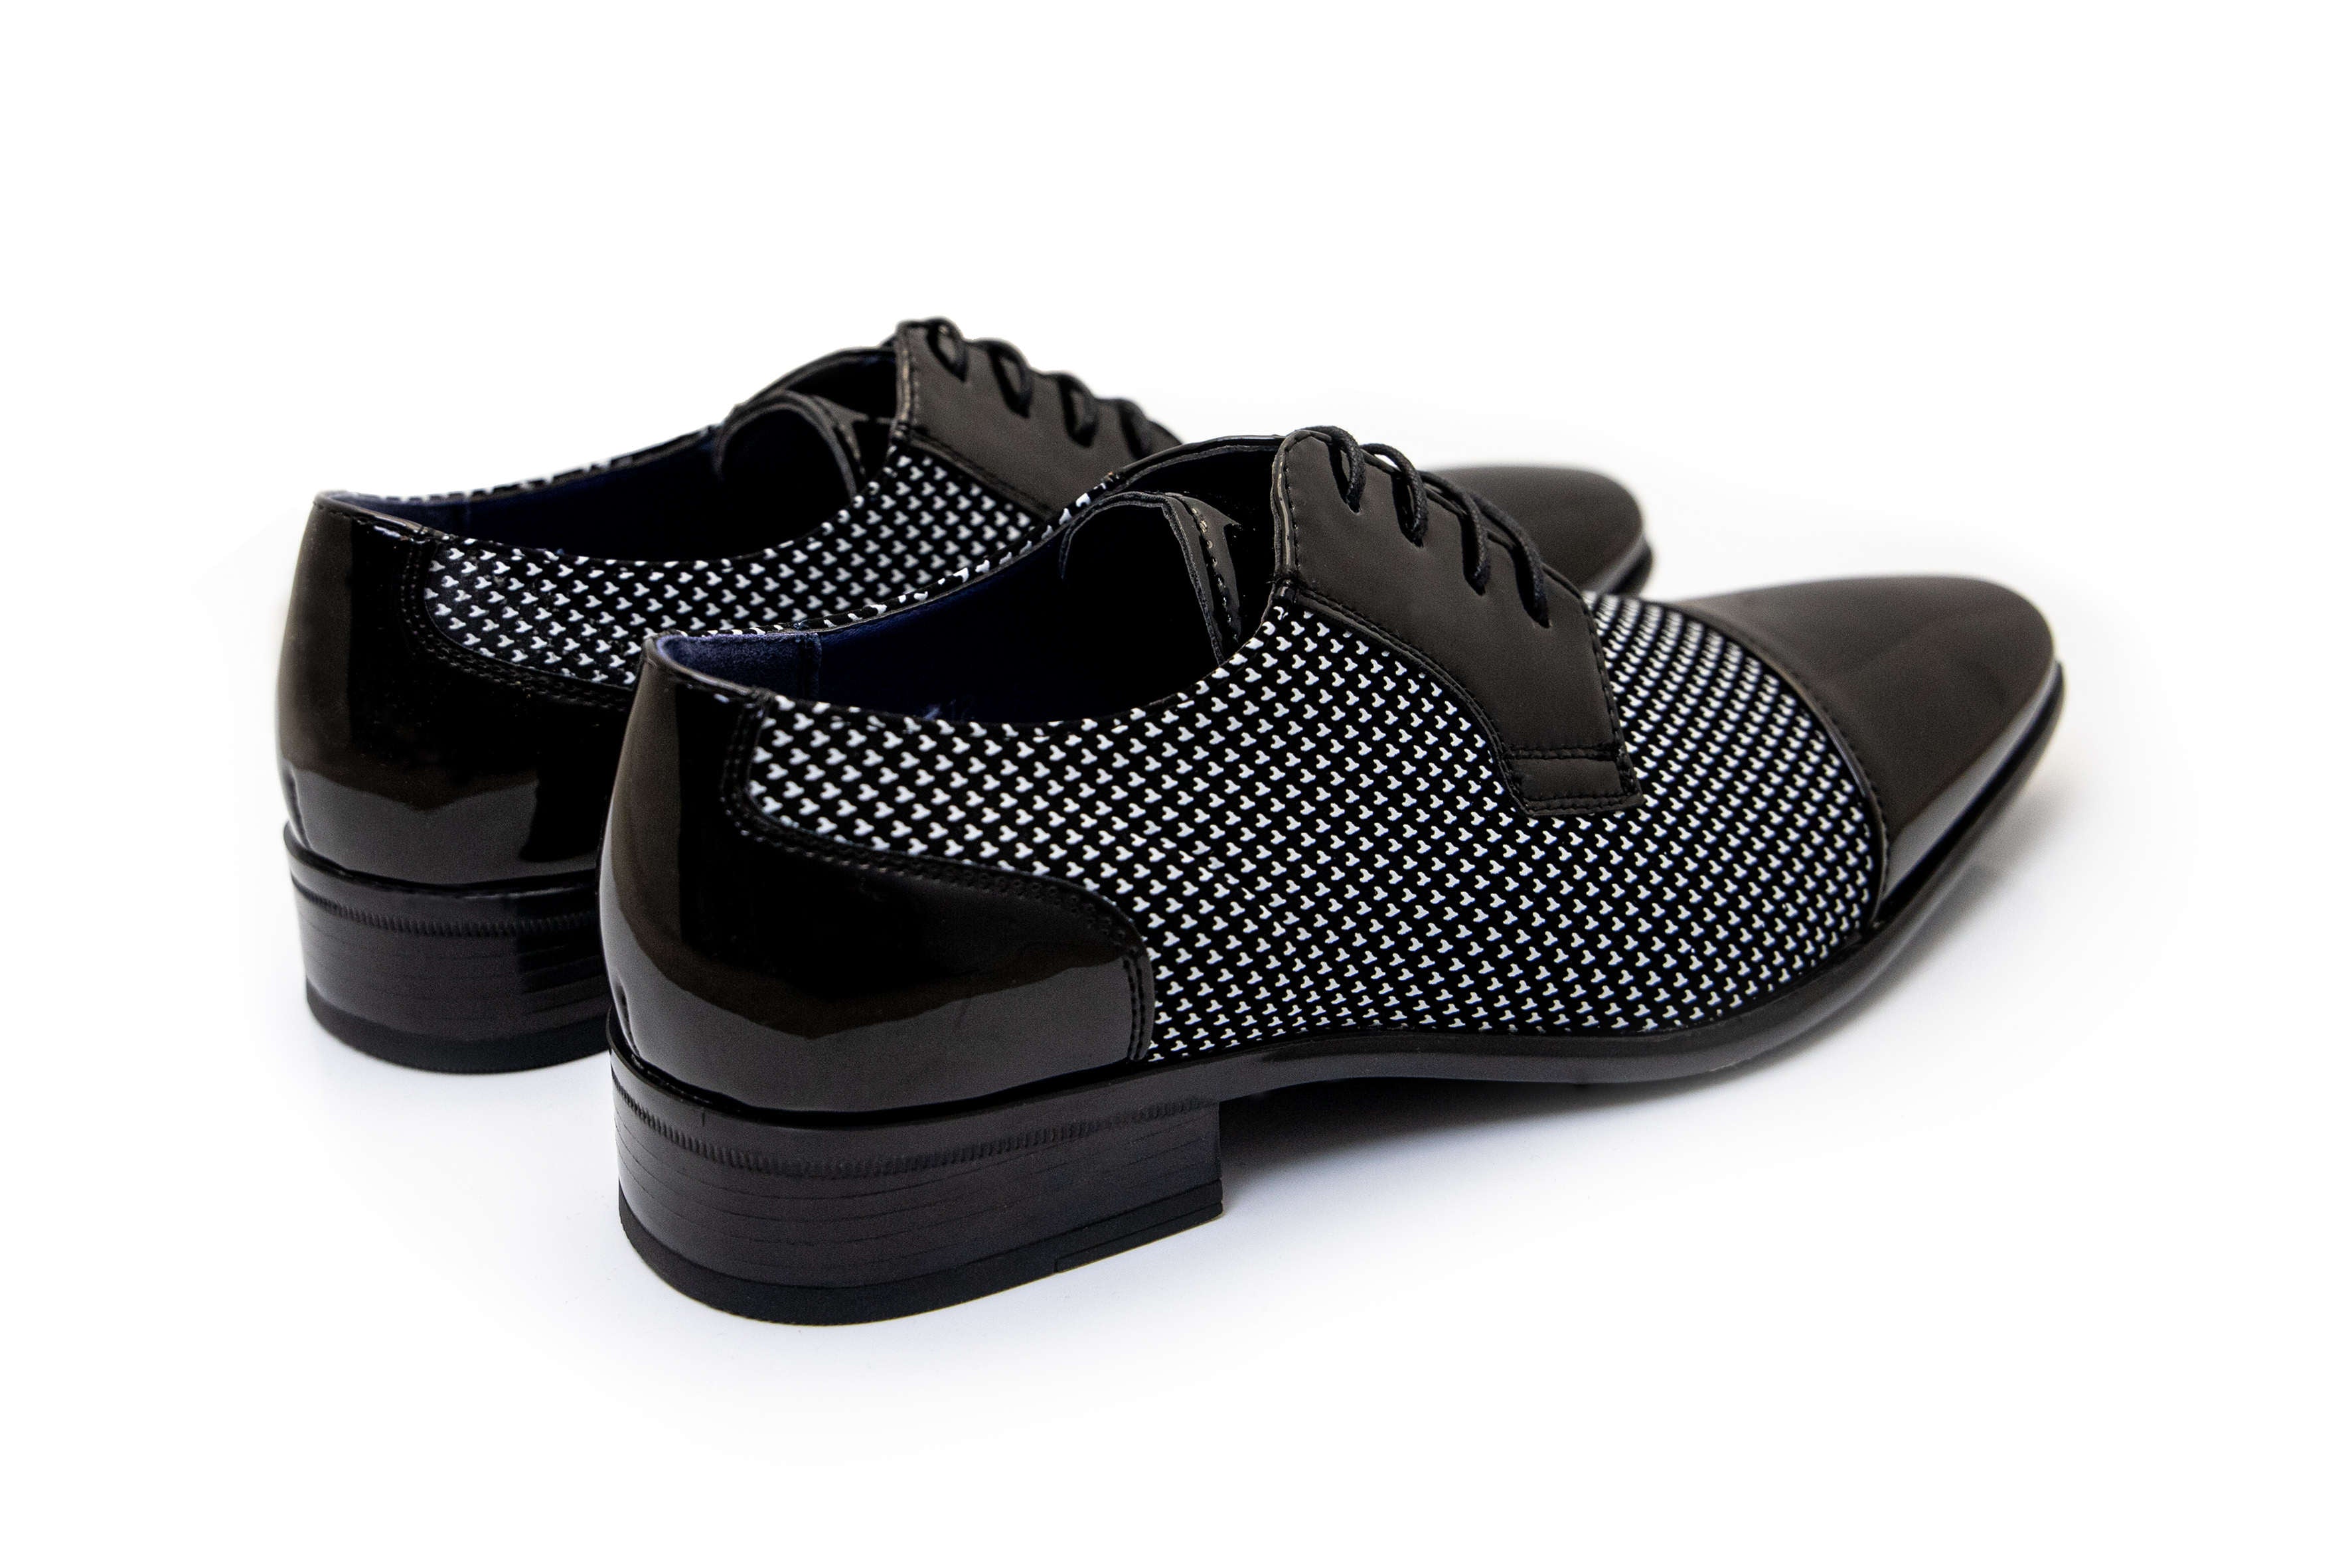 PATENT LEATHER LACE UP SHOES IN TWO TONE